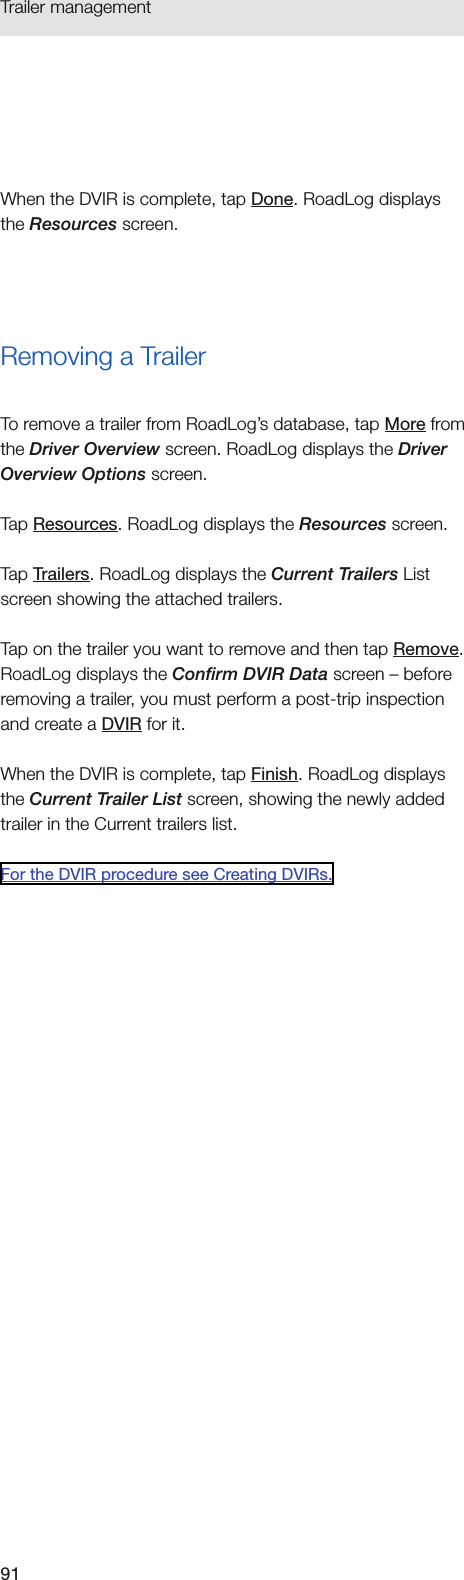 91Trailer management When the DVIR is complete, tap Done. RoadLog displays the Resources screen.Removing a TrailerTo remove a trailer from RoadLog’s database, tap More from the Driver Overview screen. RoadLog displays the Driver Overview Options screen.Tap Resources. RoadLog displays the Resources screen. Tap Trailers. RoadLog displays the Current Trailers List screen showing the attached trailers.Tap on the trailer you want to remove and then tap Remove. RoadLog displays the Confirm DVIR Data screen – before removing a trailer, you must perform a post-trip inspection and create a DVIR for it. When the DVIR is complete, tap Finish. RoadLog displays the Current Trailer List screen, showing the newly added trailer in the Current trailers list.For the DVIR procedure see Creating DVIRs.